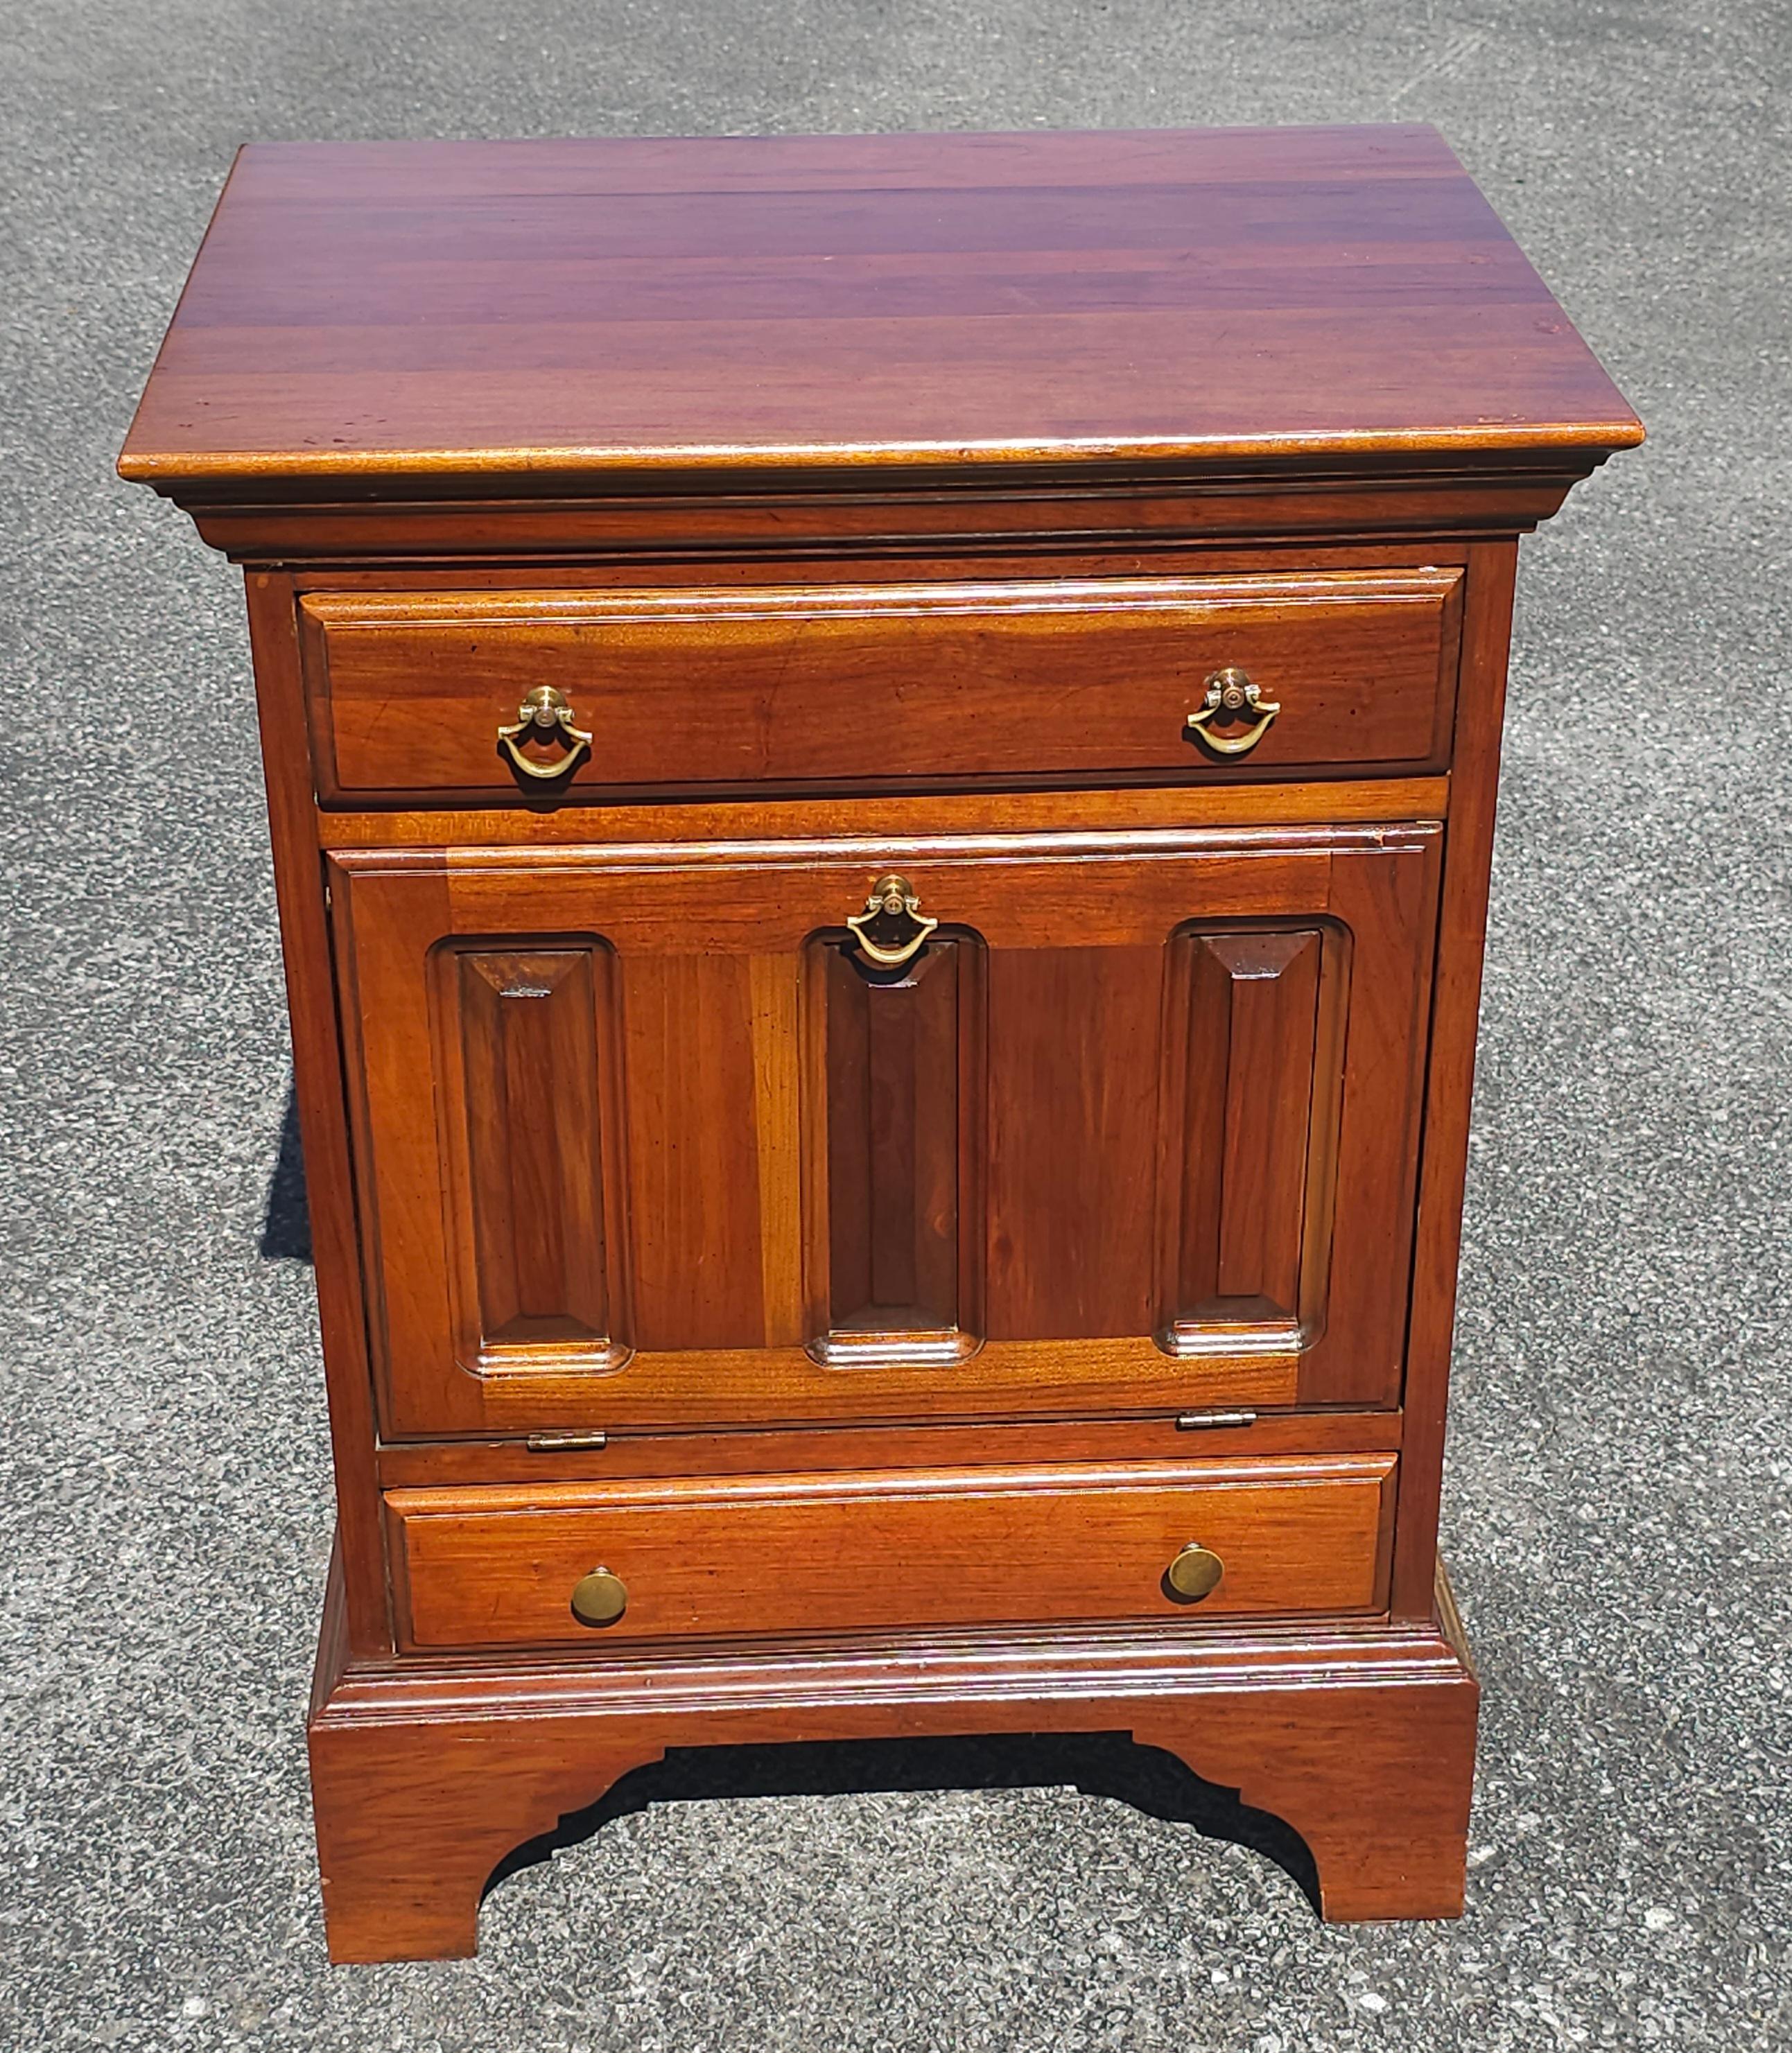 20th Century David Cabinet Cherry 2-Drawer a Abattant Door Bedside Cabinets Pair For Sale 1